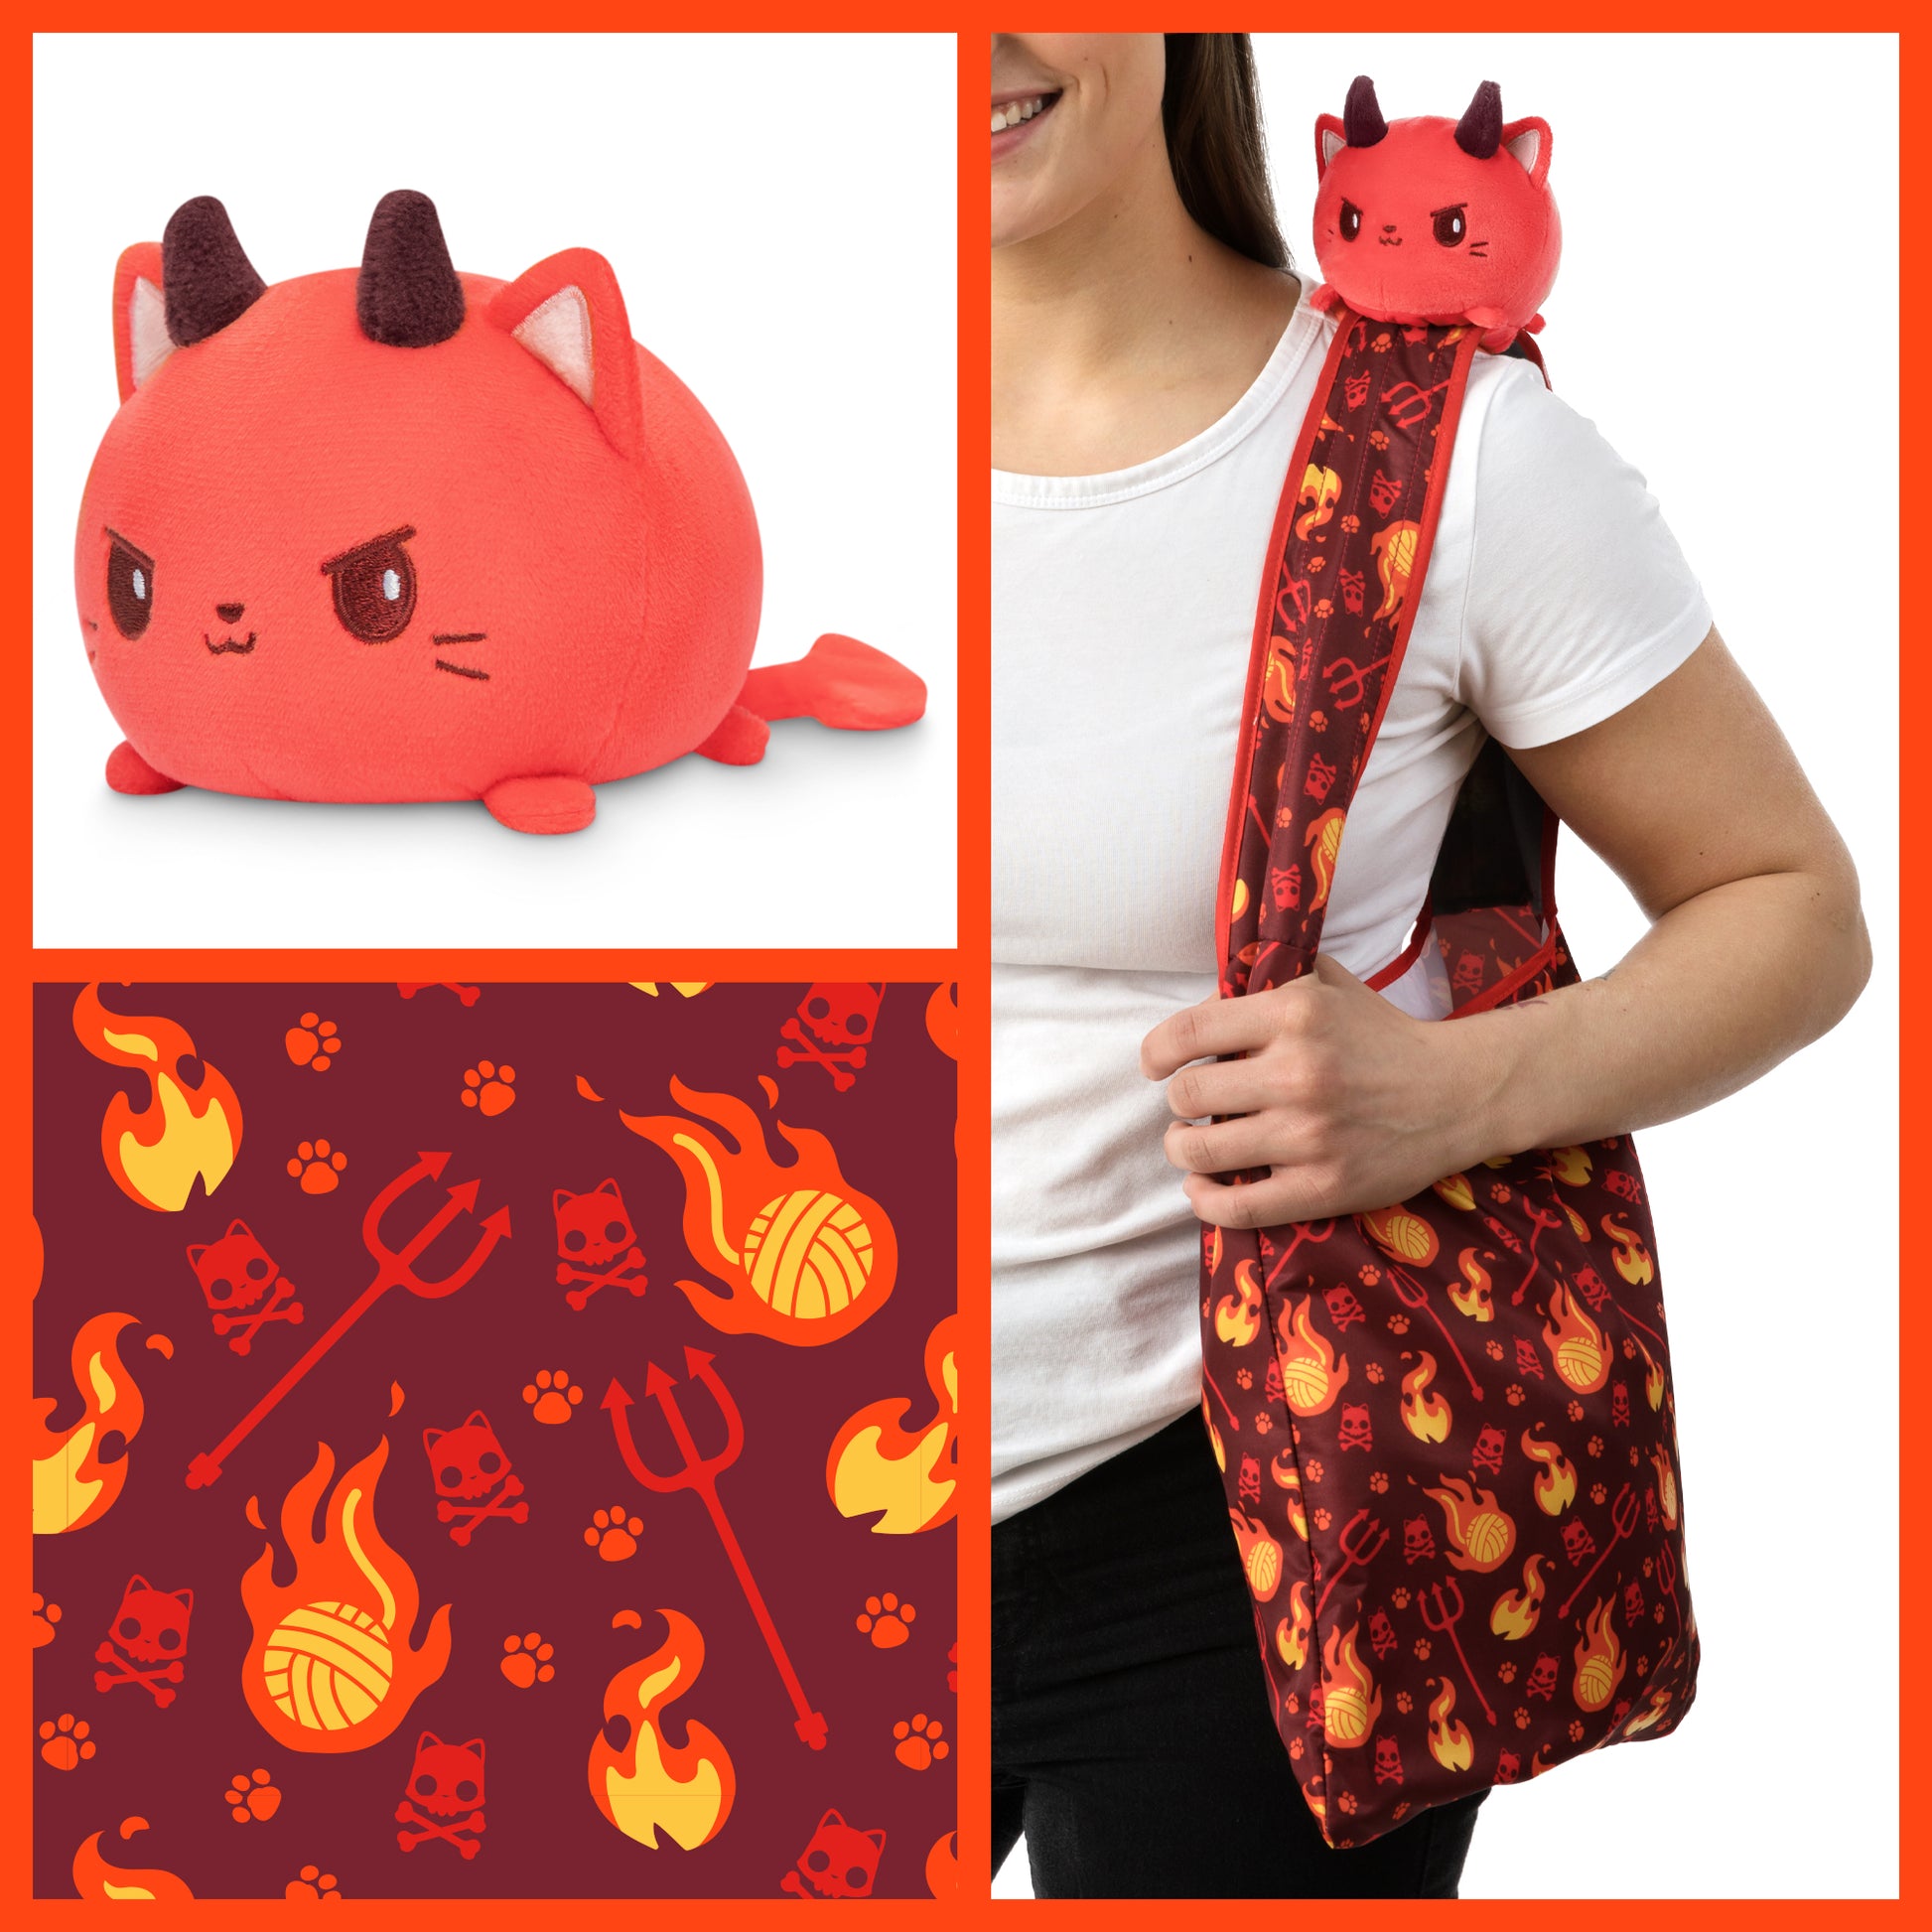 A woman is carrying a Plushiverse Devilish Kitty Plushie and a TeeTurtle tote bag with flames on it.